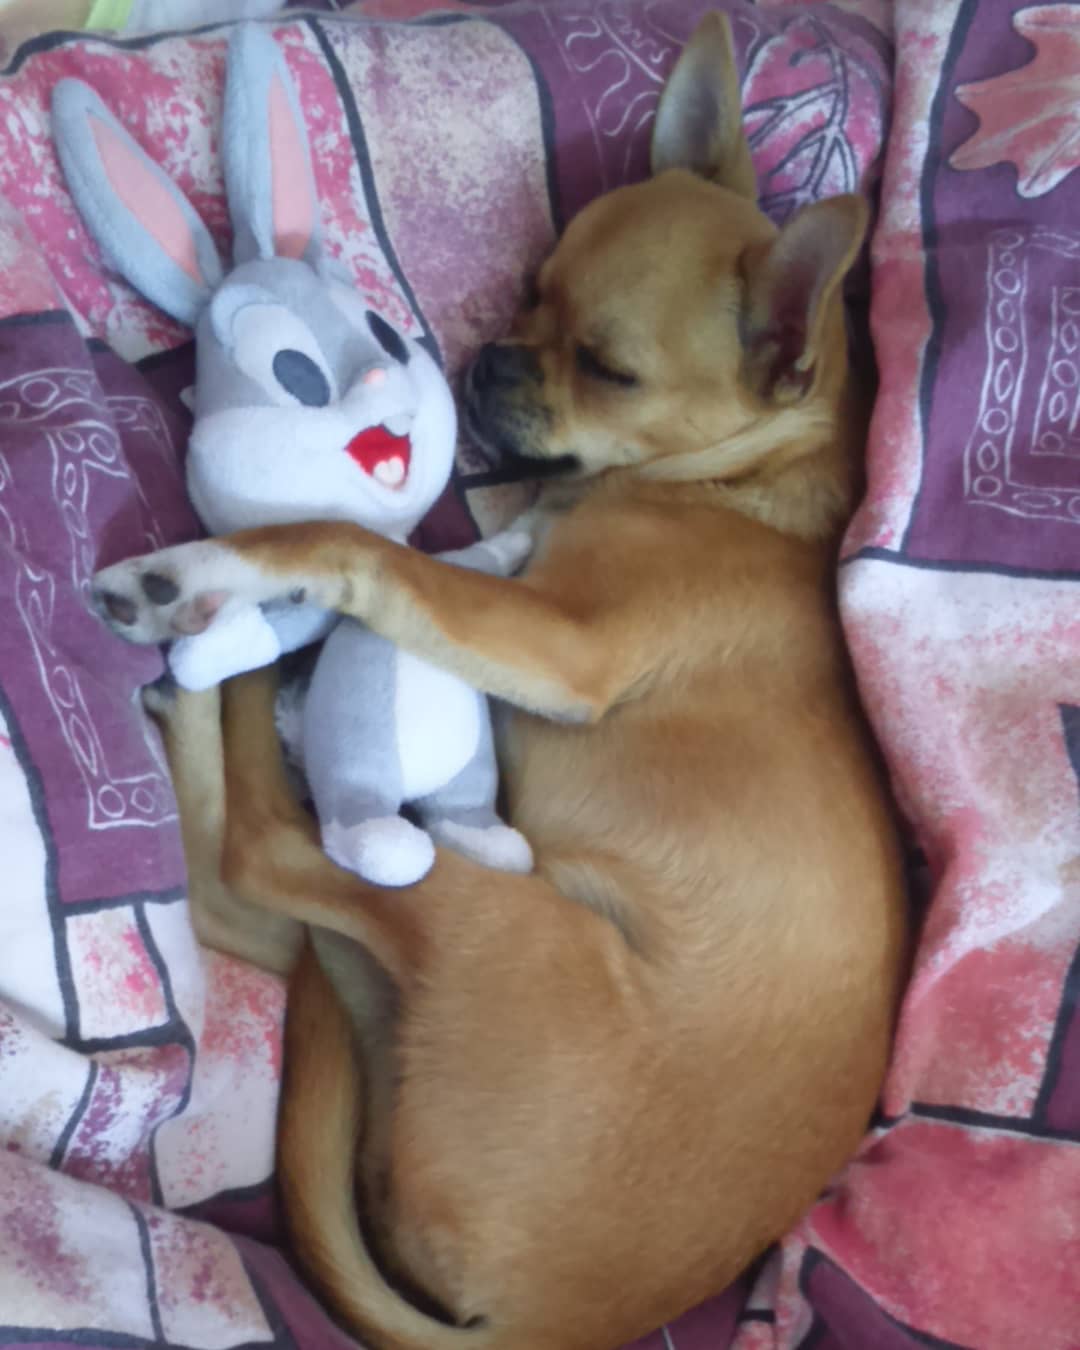 Chihuahua sleep on its bed with its bunny toy